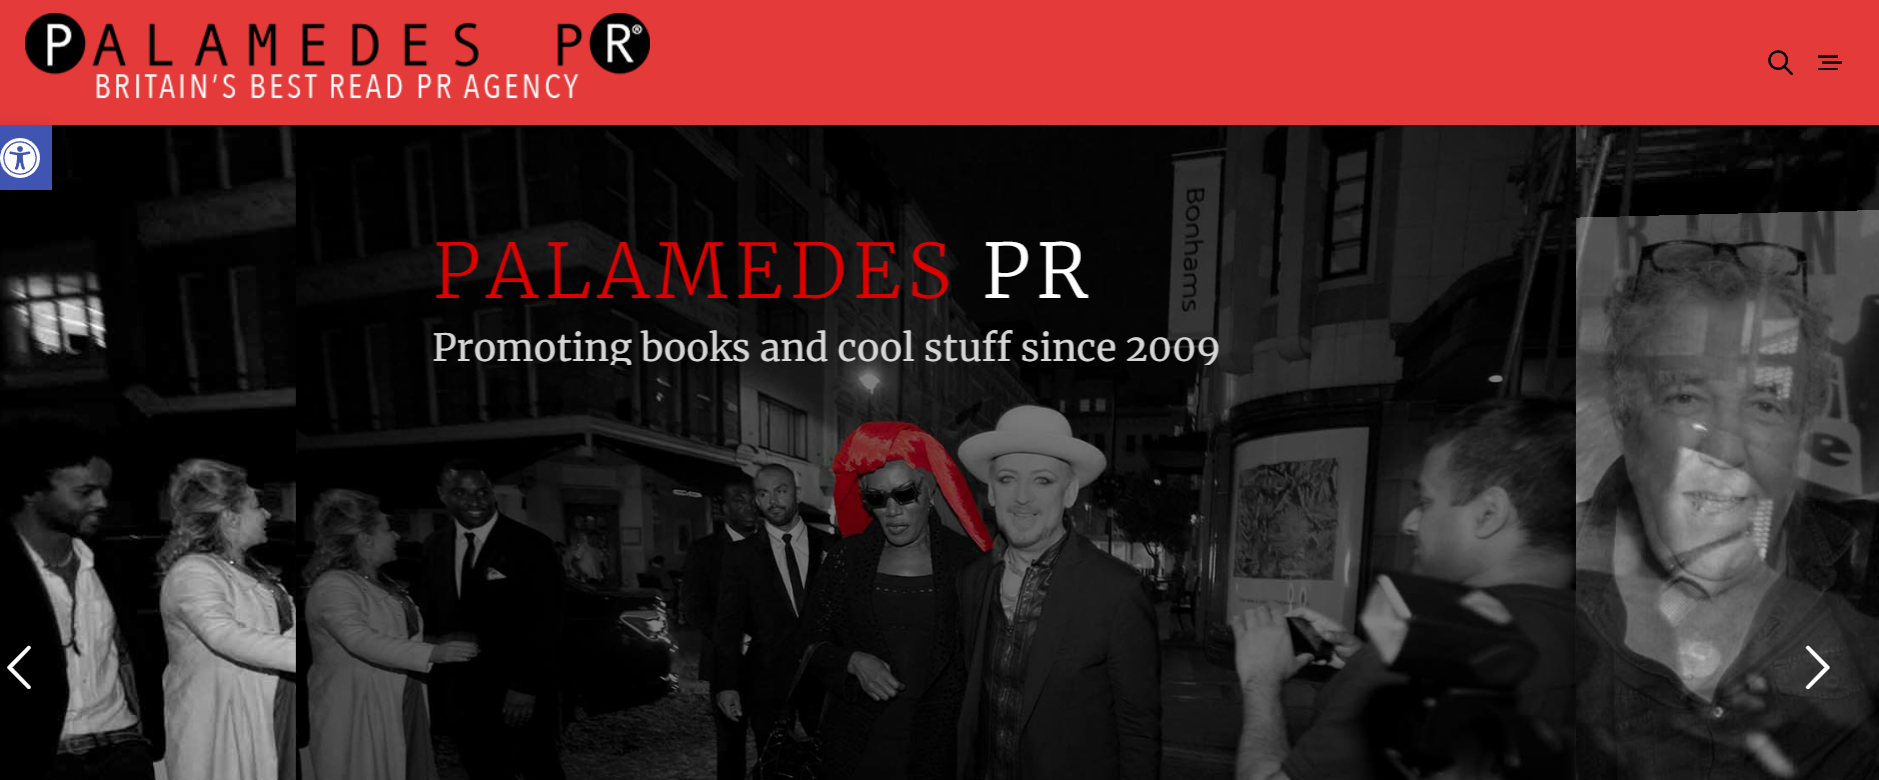 Palamedes PR book marketing company homepage